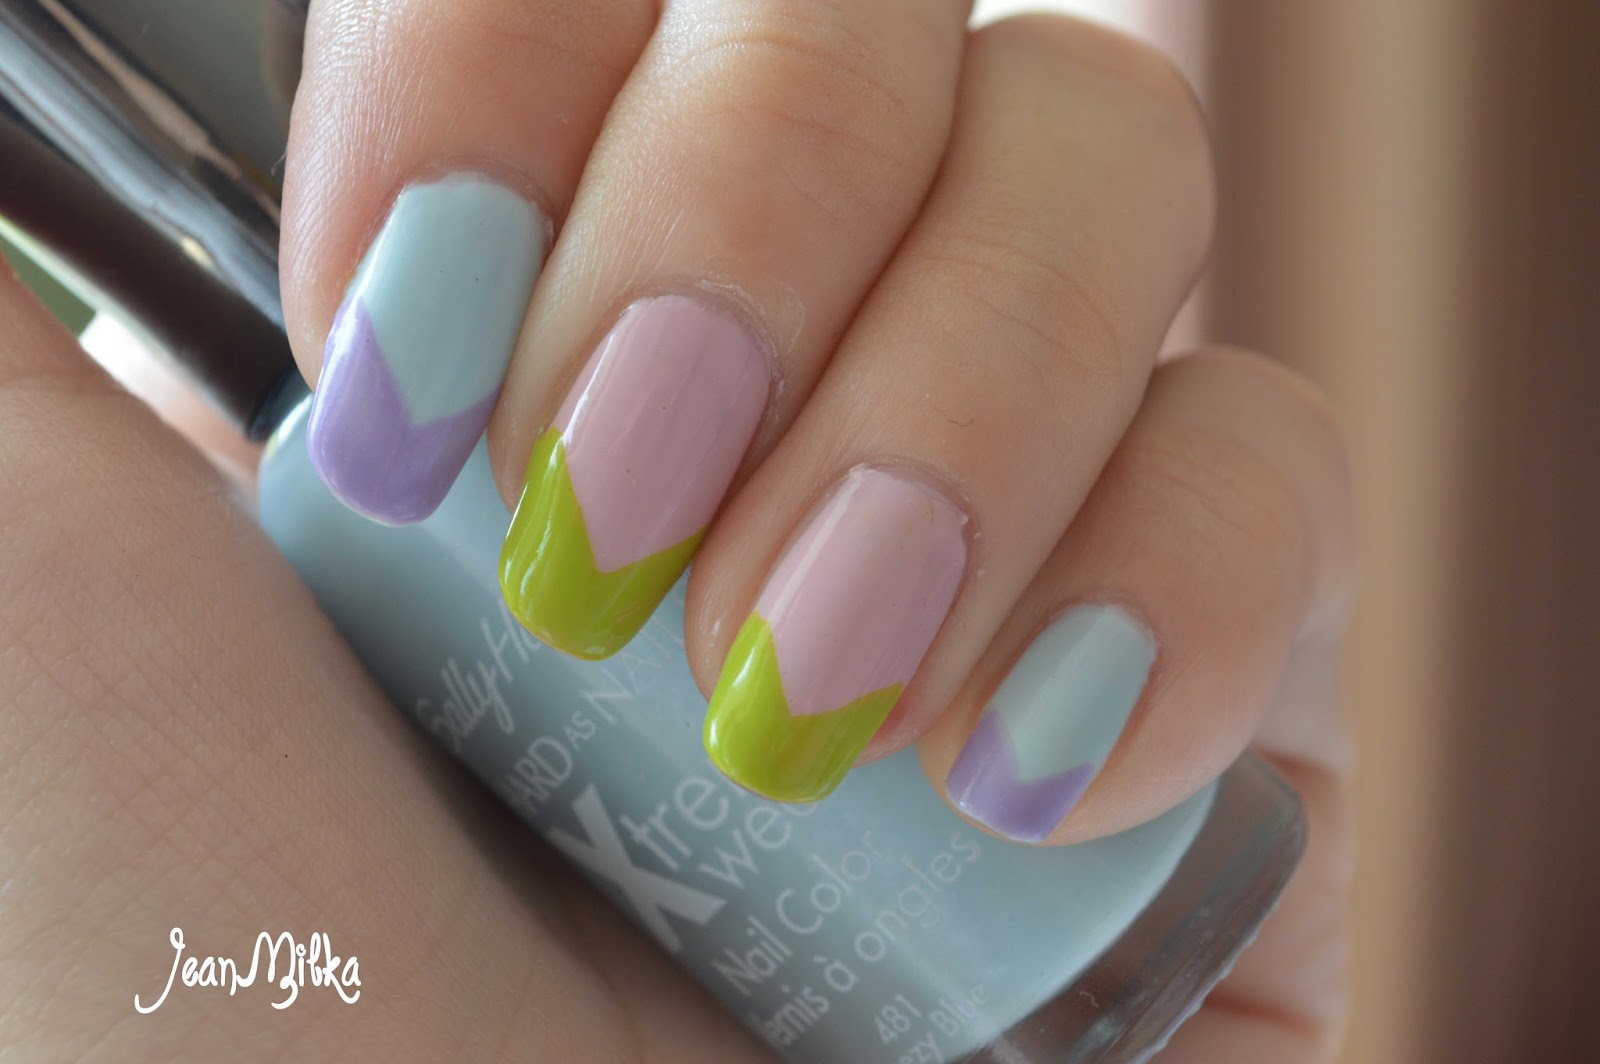 3. Pastel Nail Art Ideas for a Dreamy Manicure - wide 7